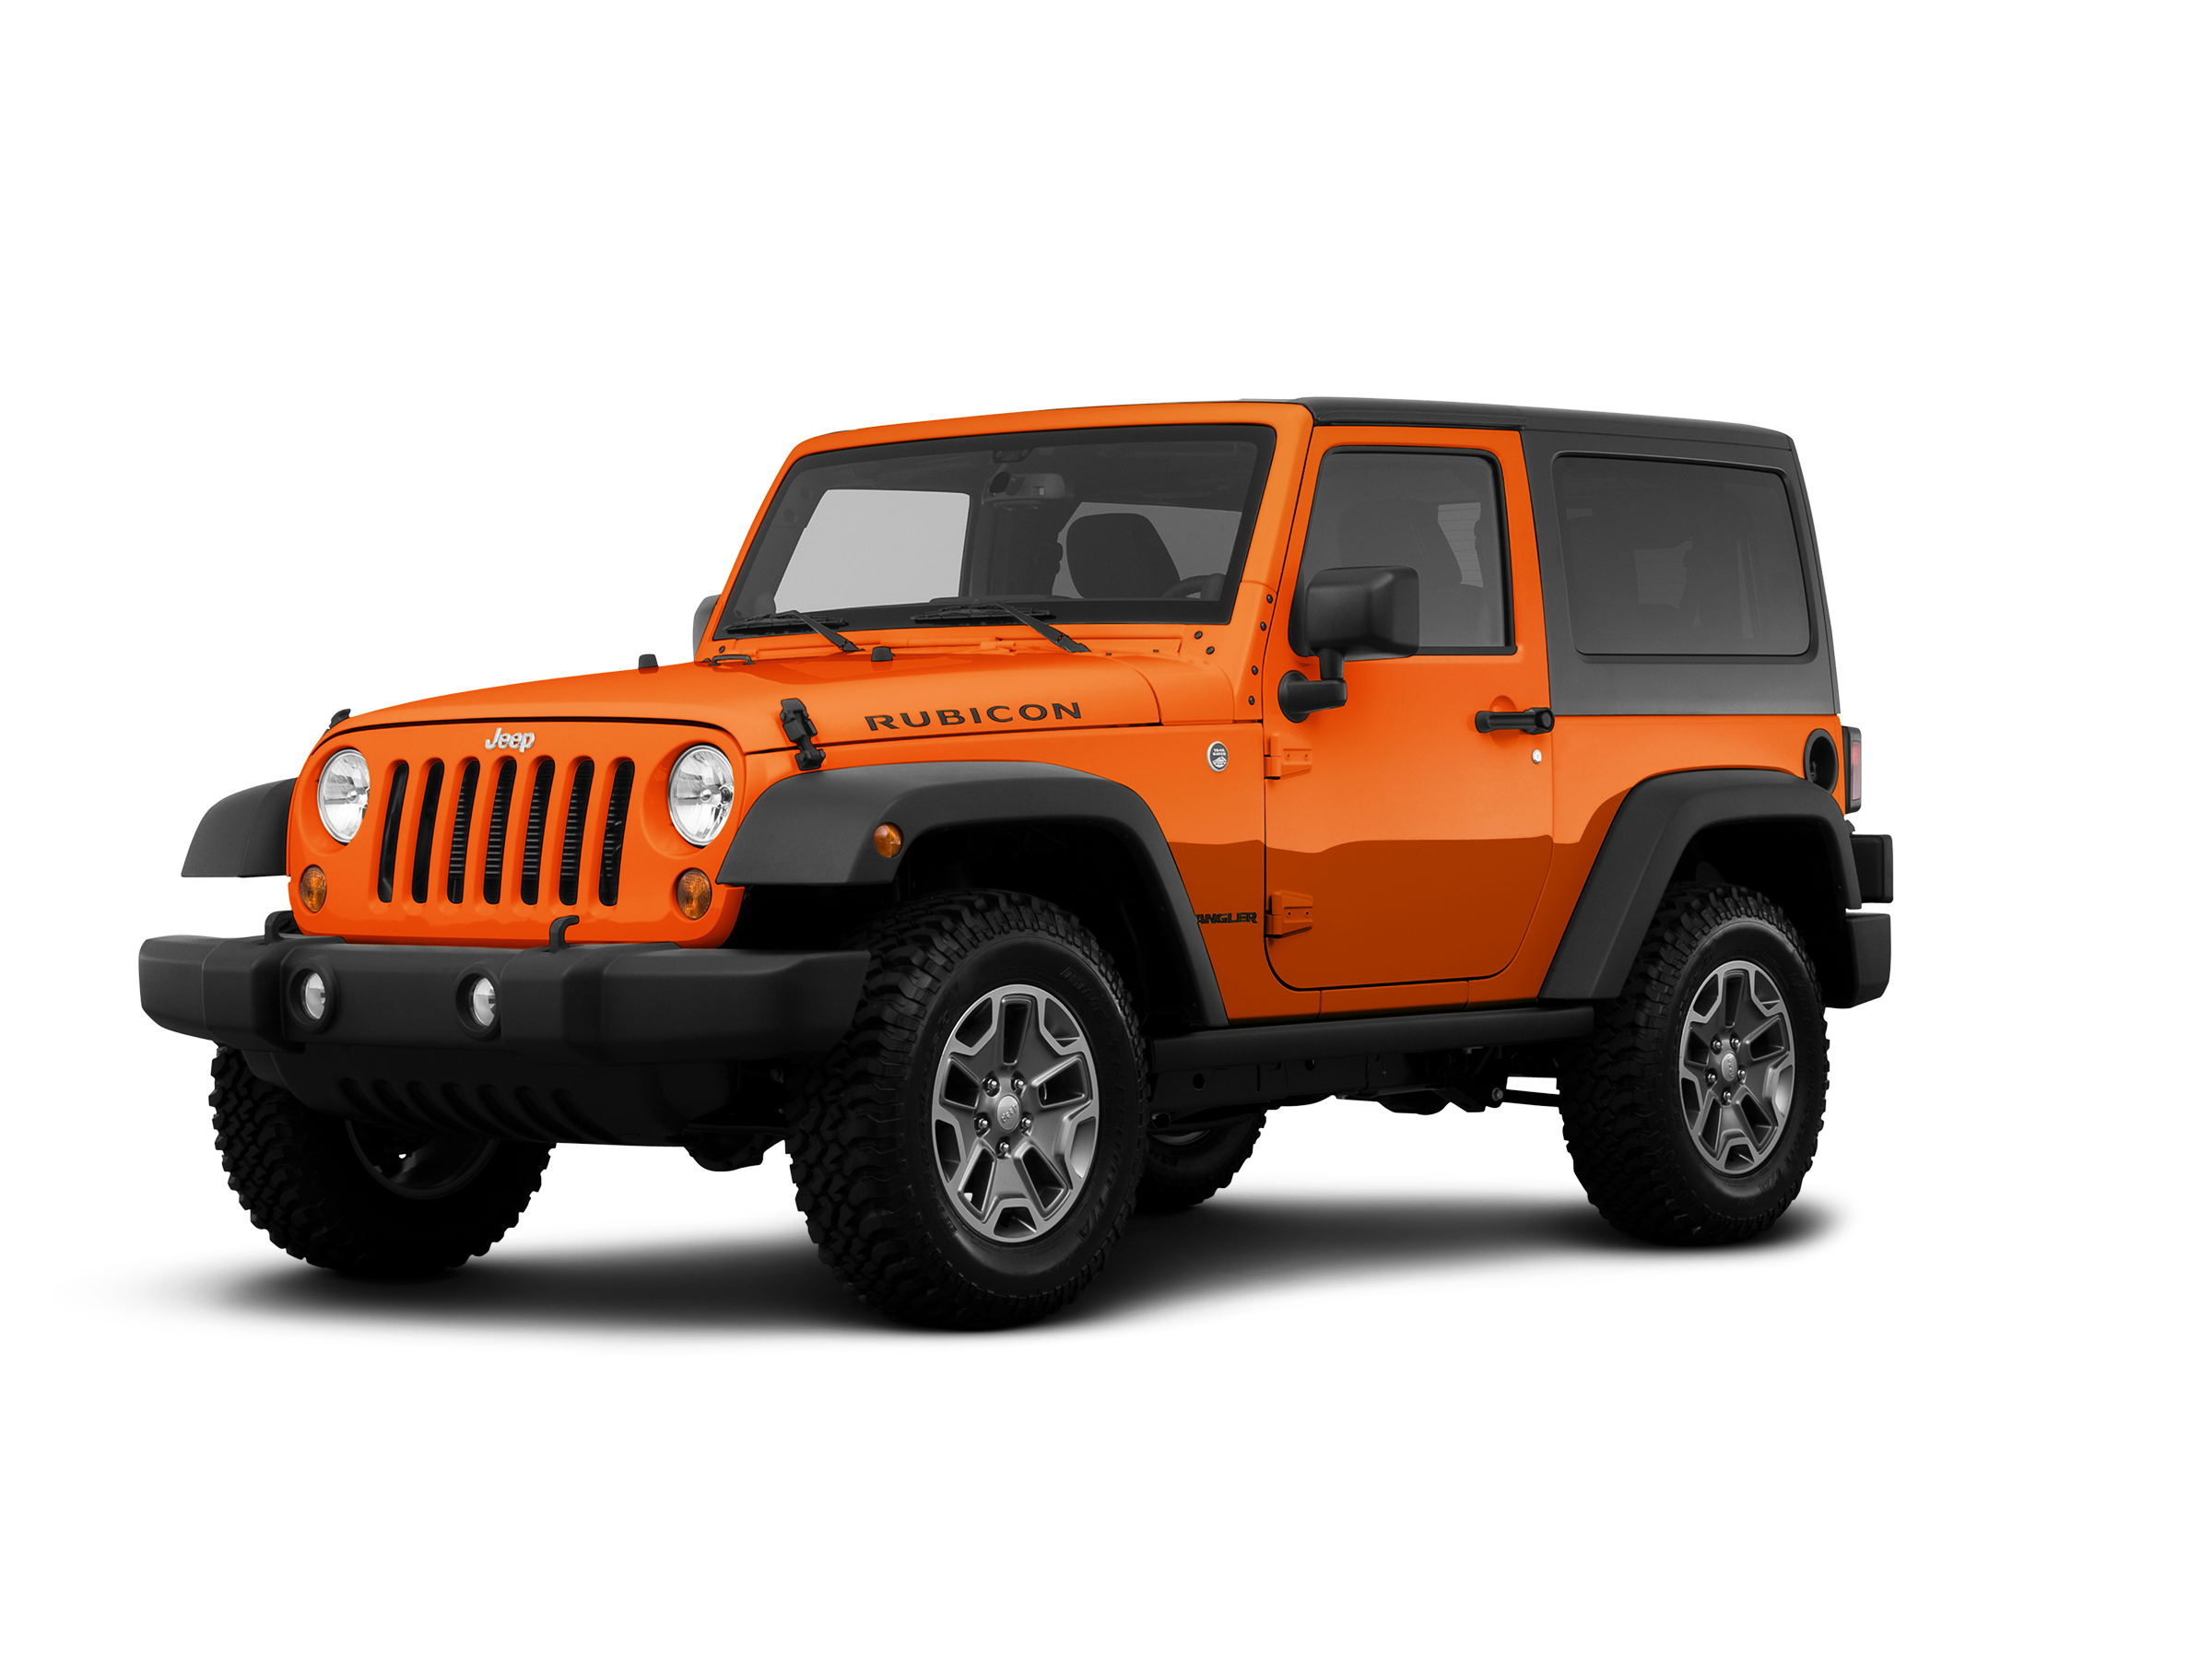 Used 2013 Jeep Wrangler Sport SUV 2D Prices | Kelley Blue Book